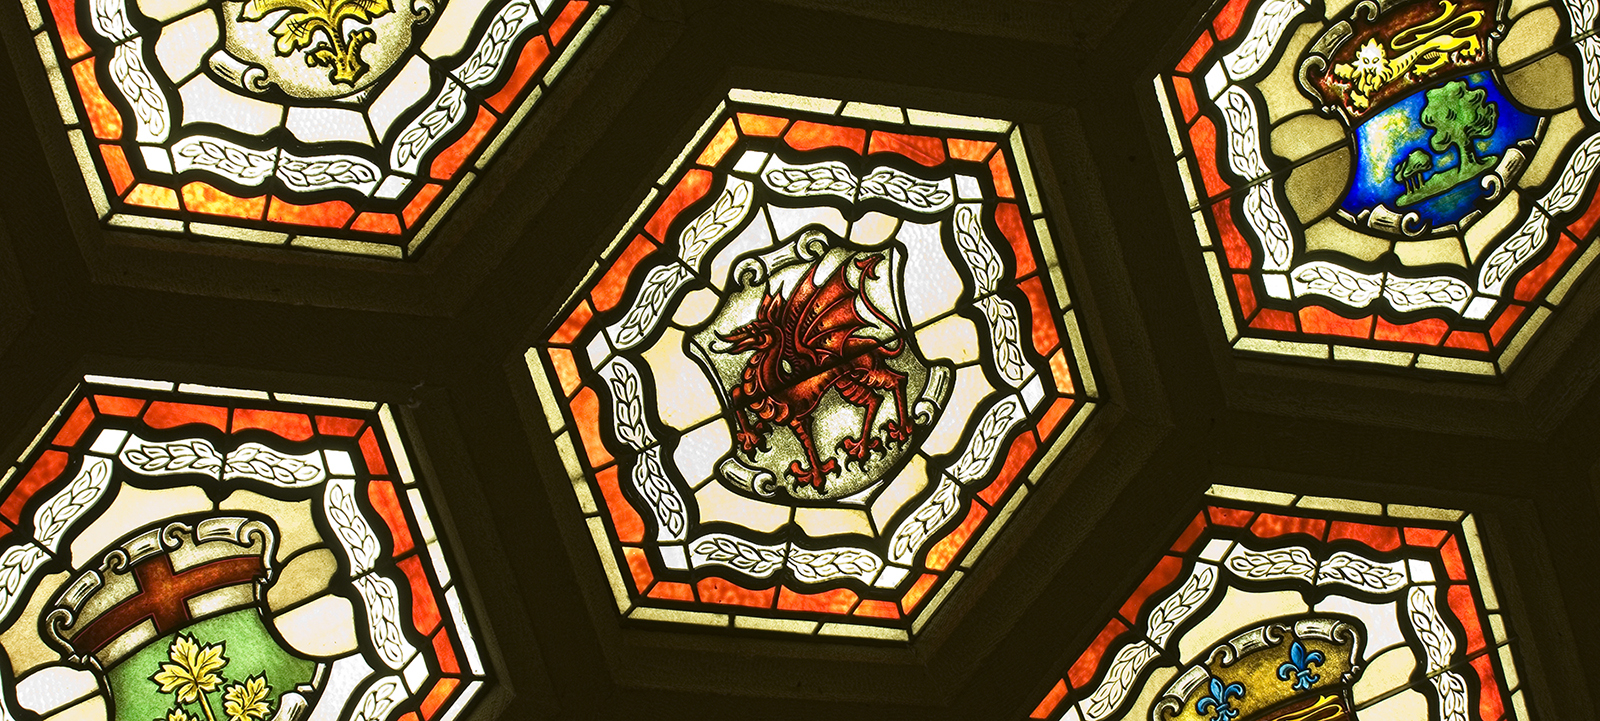 The Welsh Red Dragon is depicted on a hexagonal panel in the stained-glass ceiling of Centre Block’s Senate foyer.